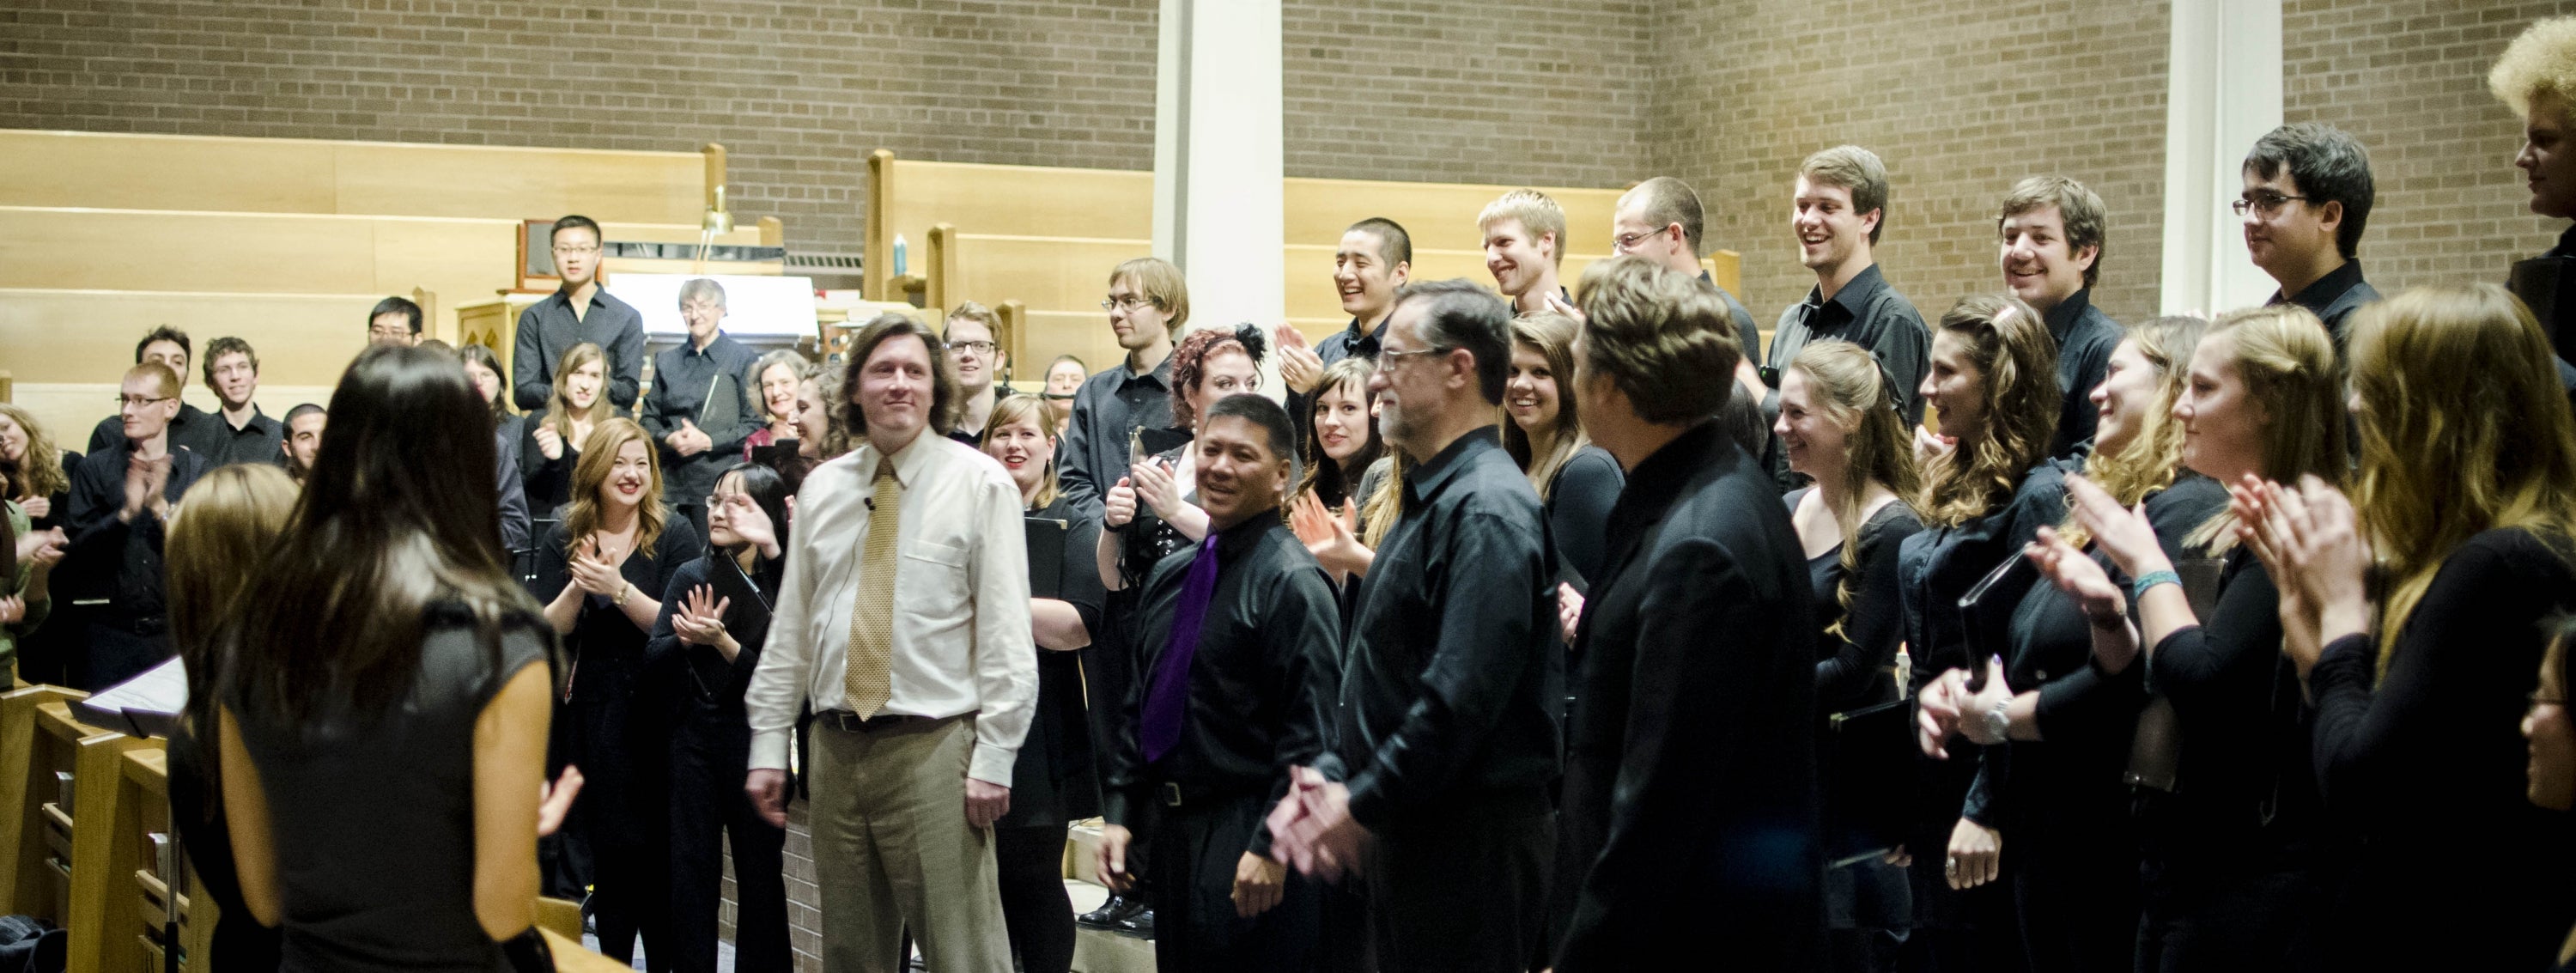 Composer Timothy Corlis with Choir and directors